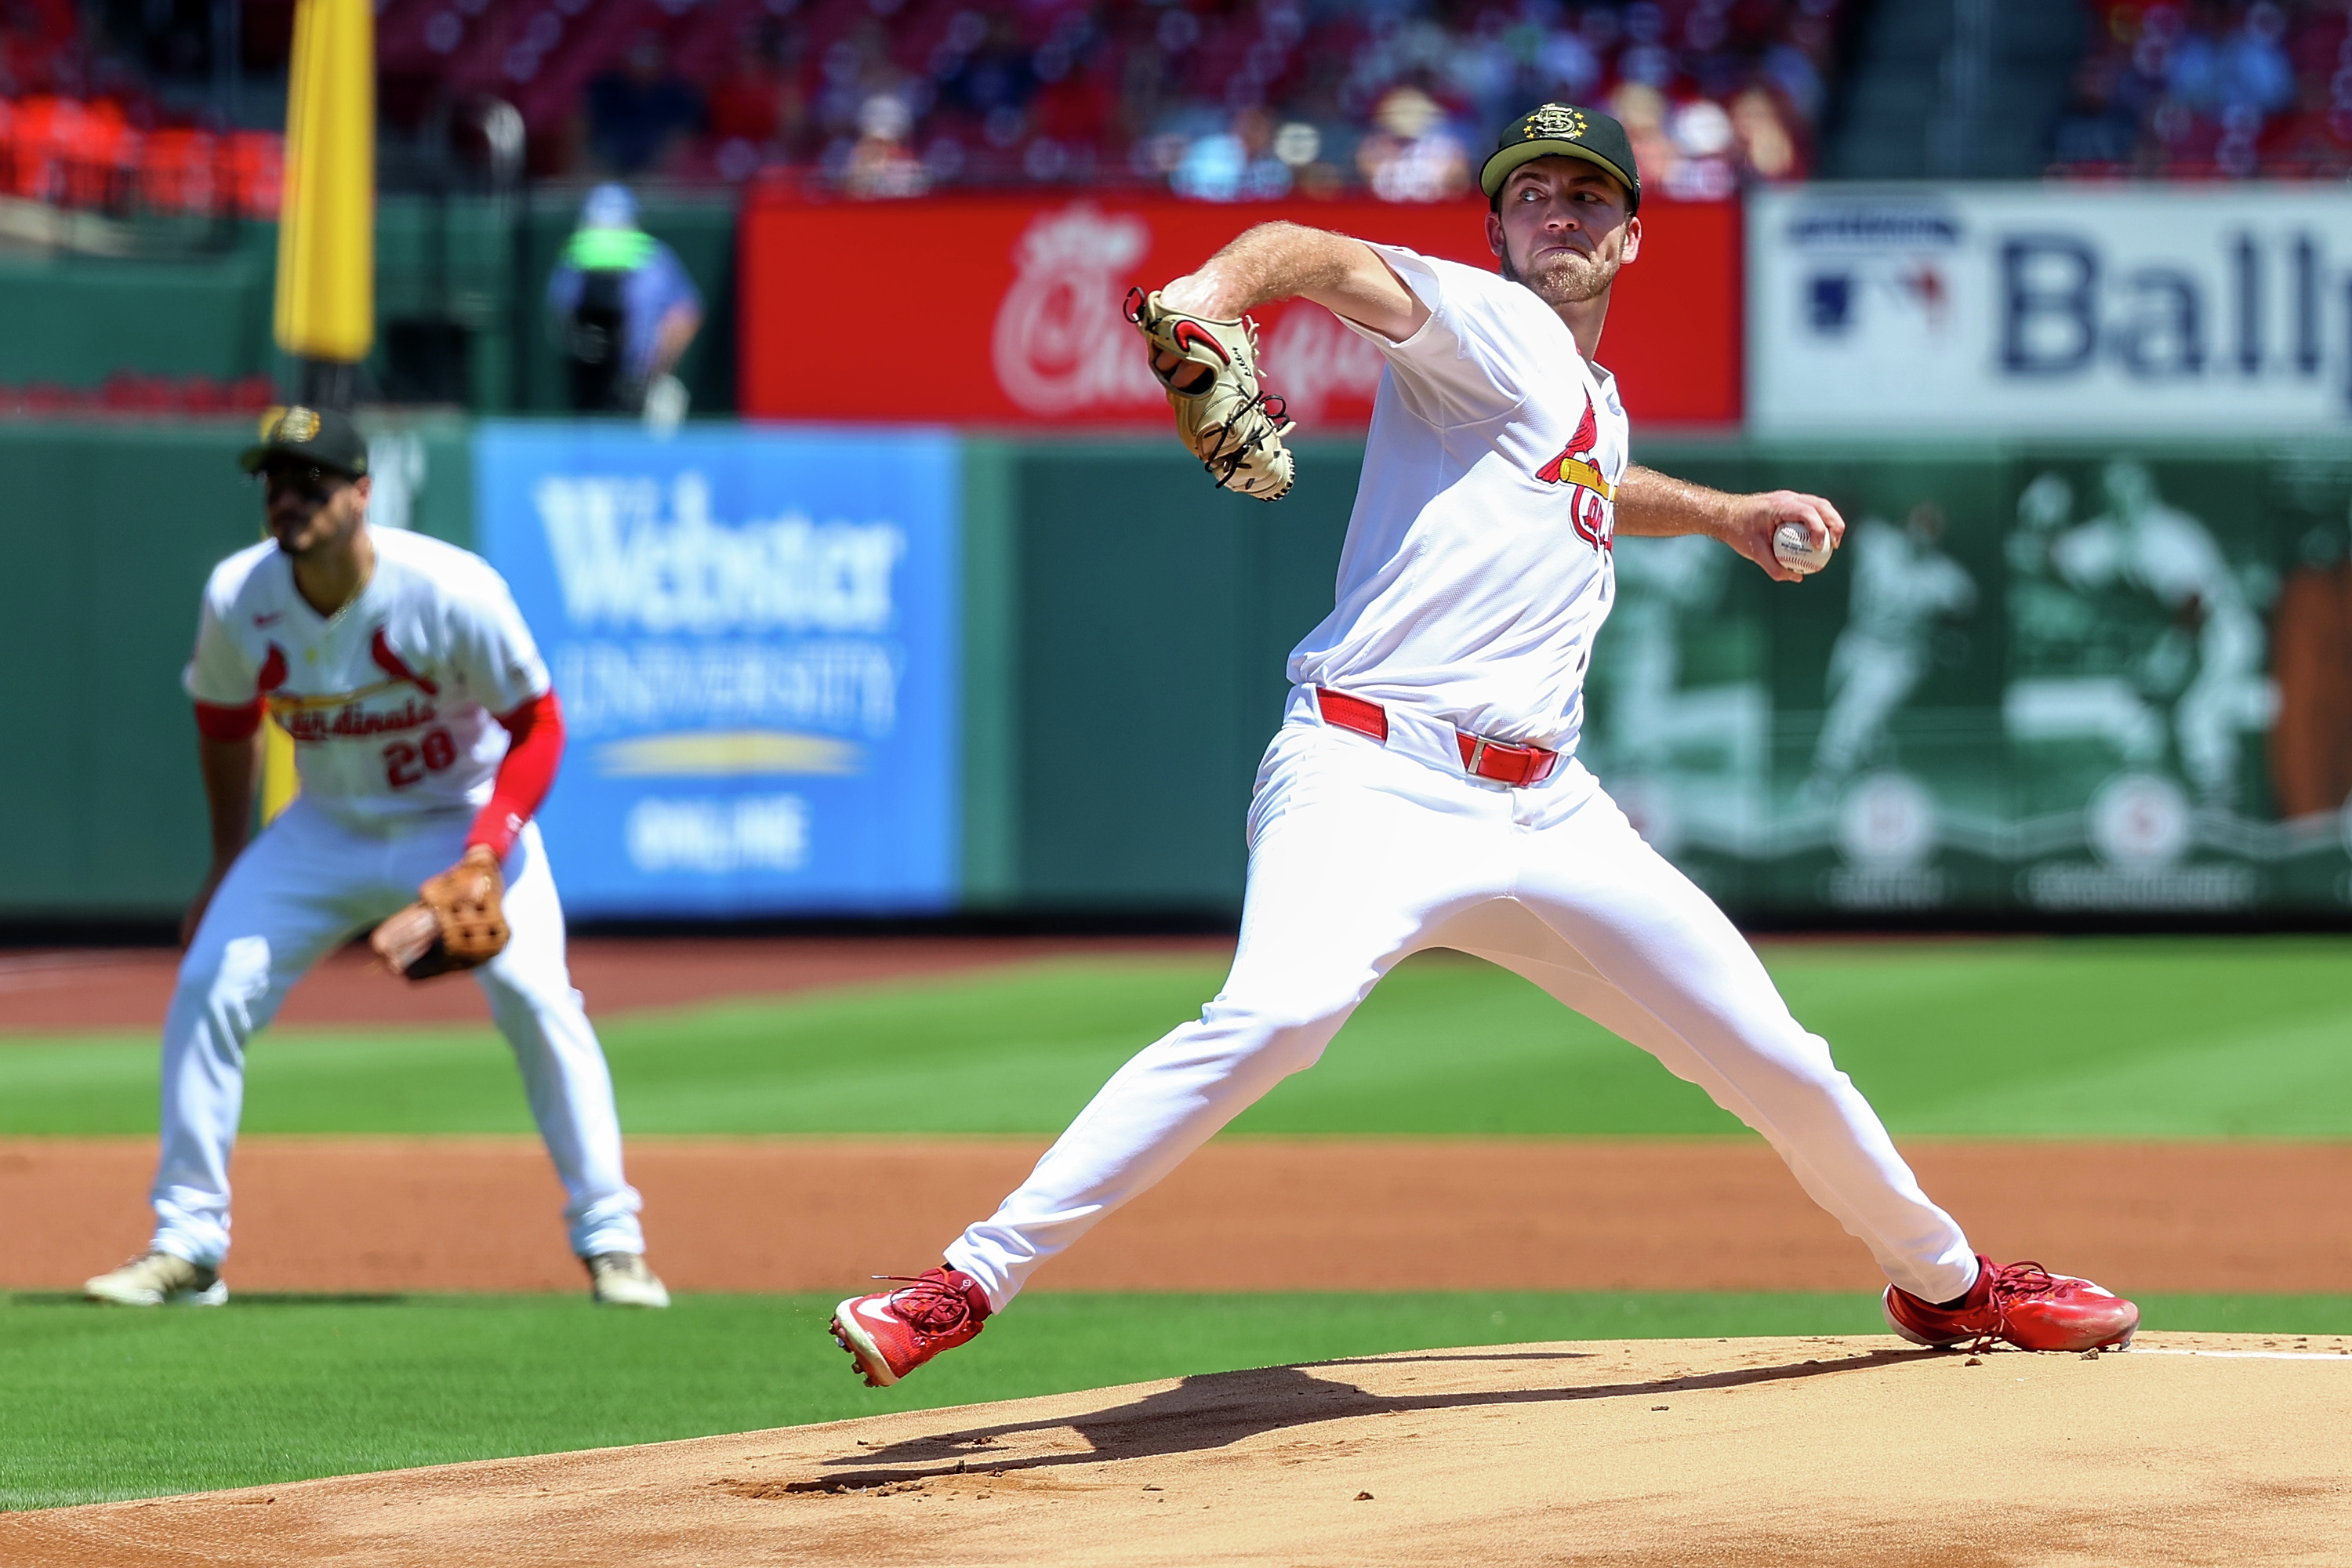 What Should the Cardinals Do With Their 5th Starting Pitcher Spot?